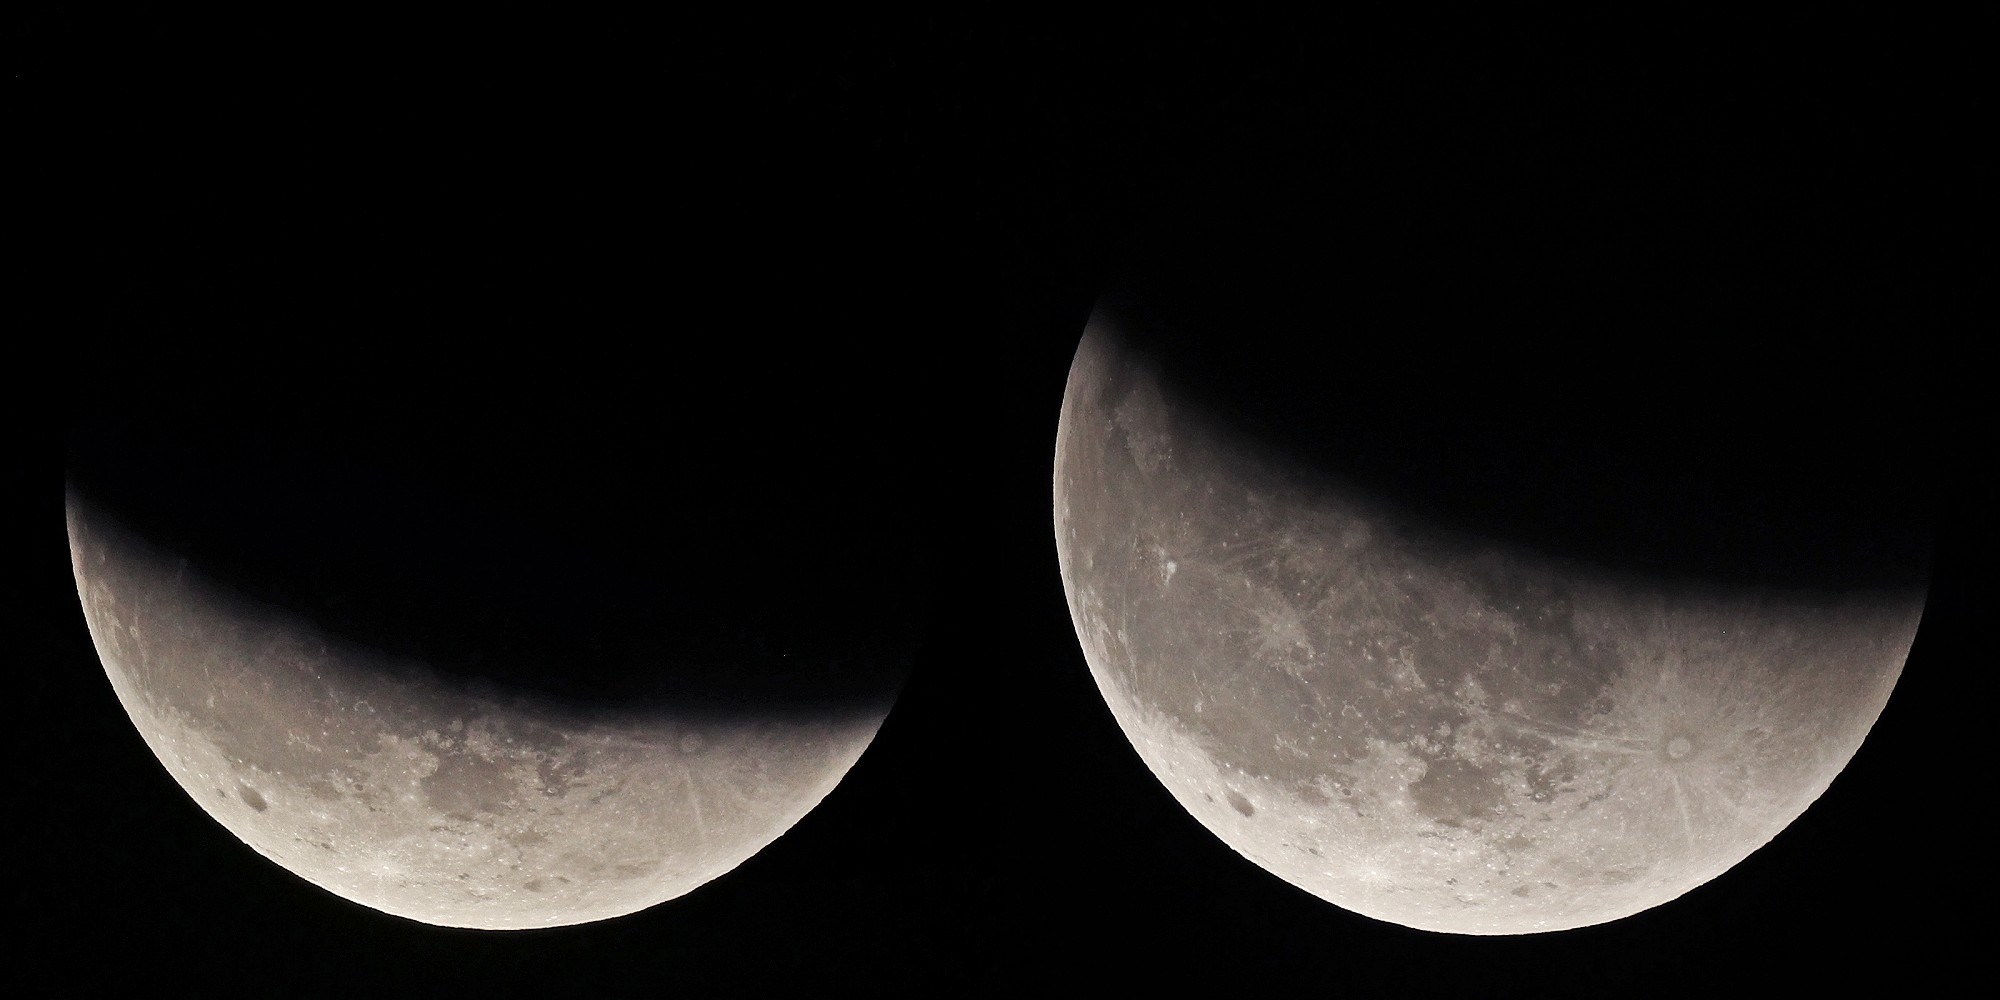 [May 15/16 Total Lunar Eclipse]